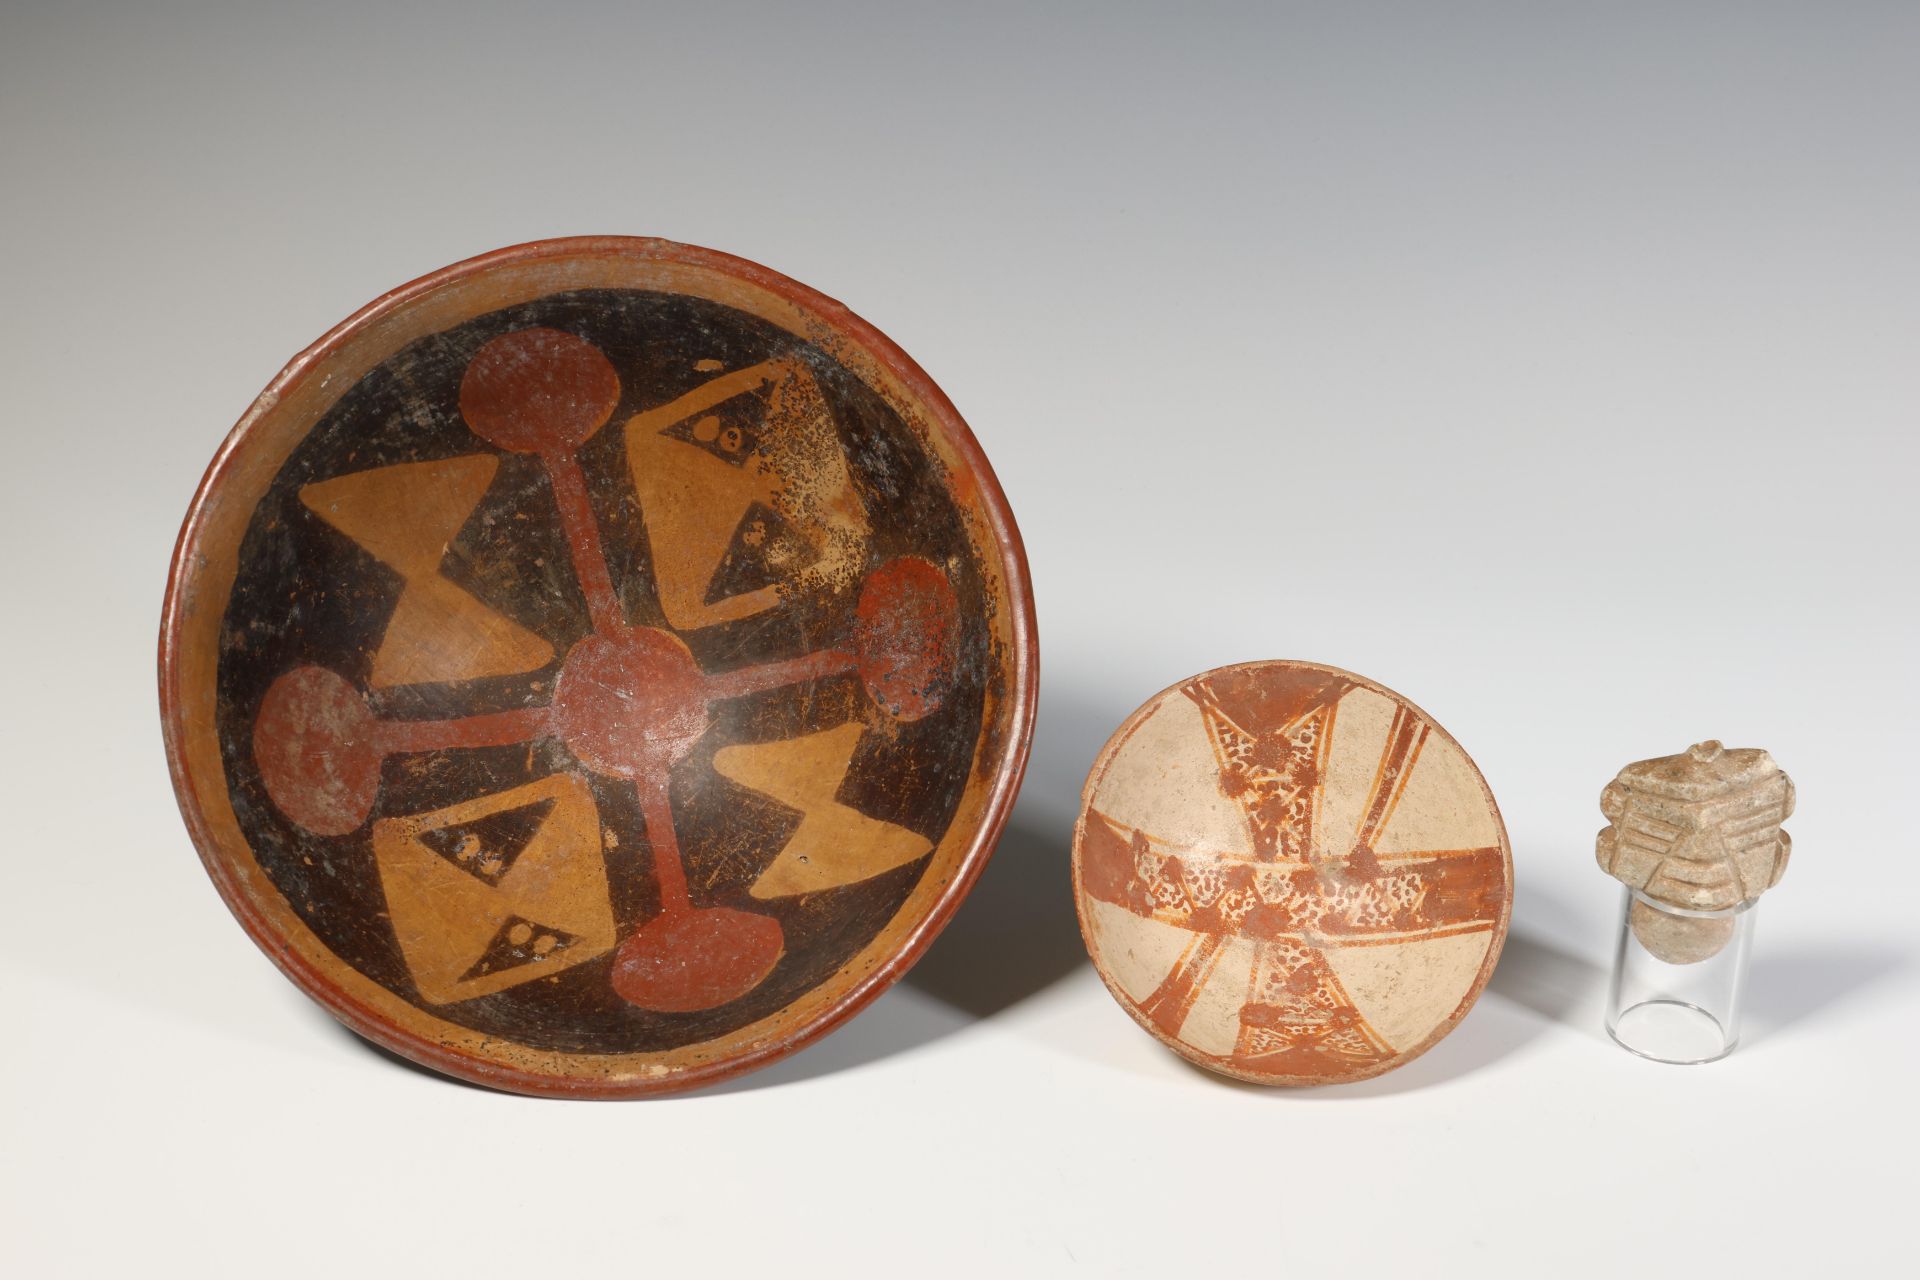 Colombia, Narino, 1200 - 1500 AD, two terracotta bowls.